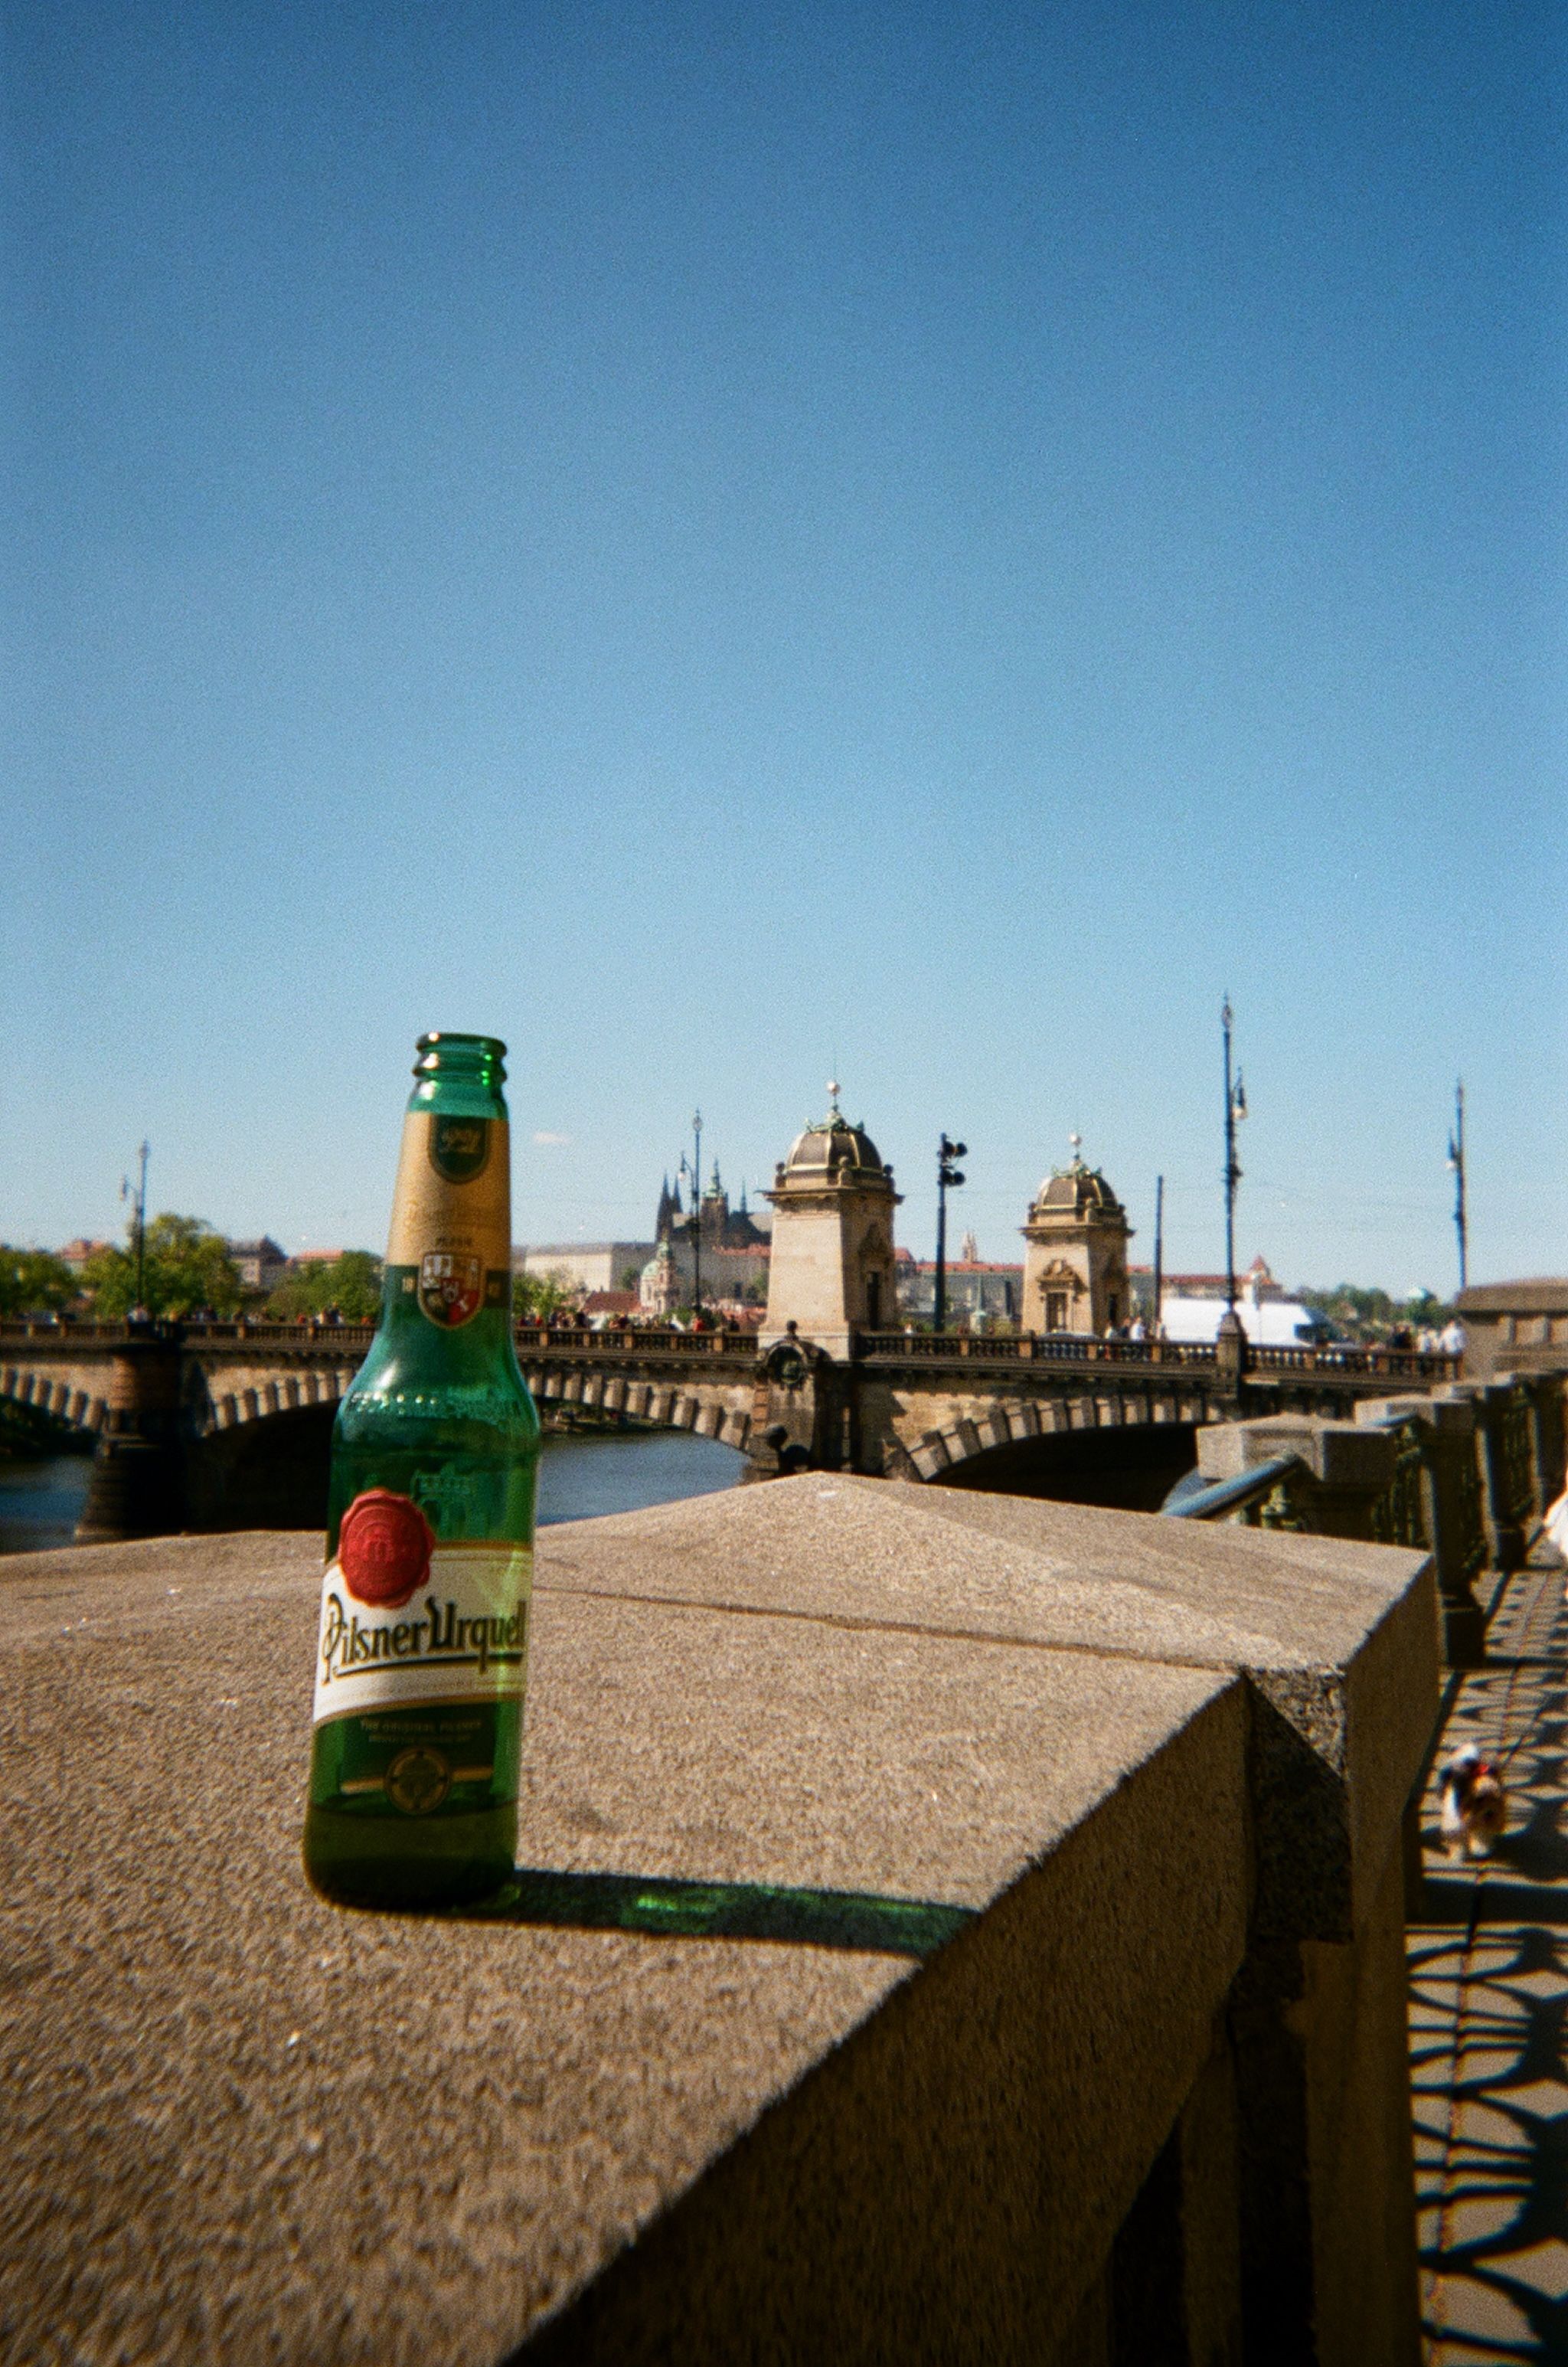 A green bottle of Ilsner Urquell beer sits on a concrete wall overlooking a scenic view.